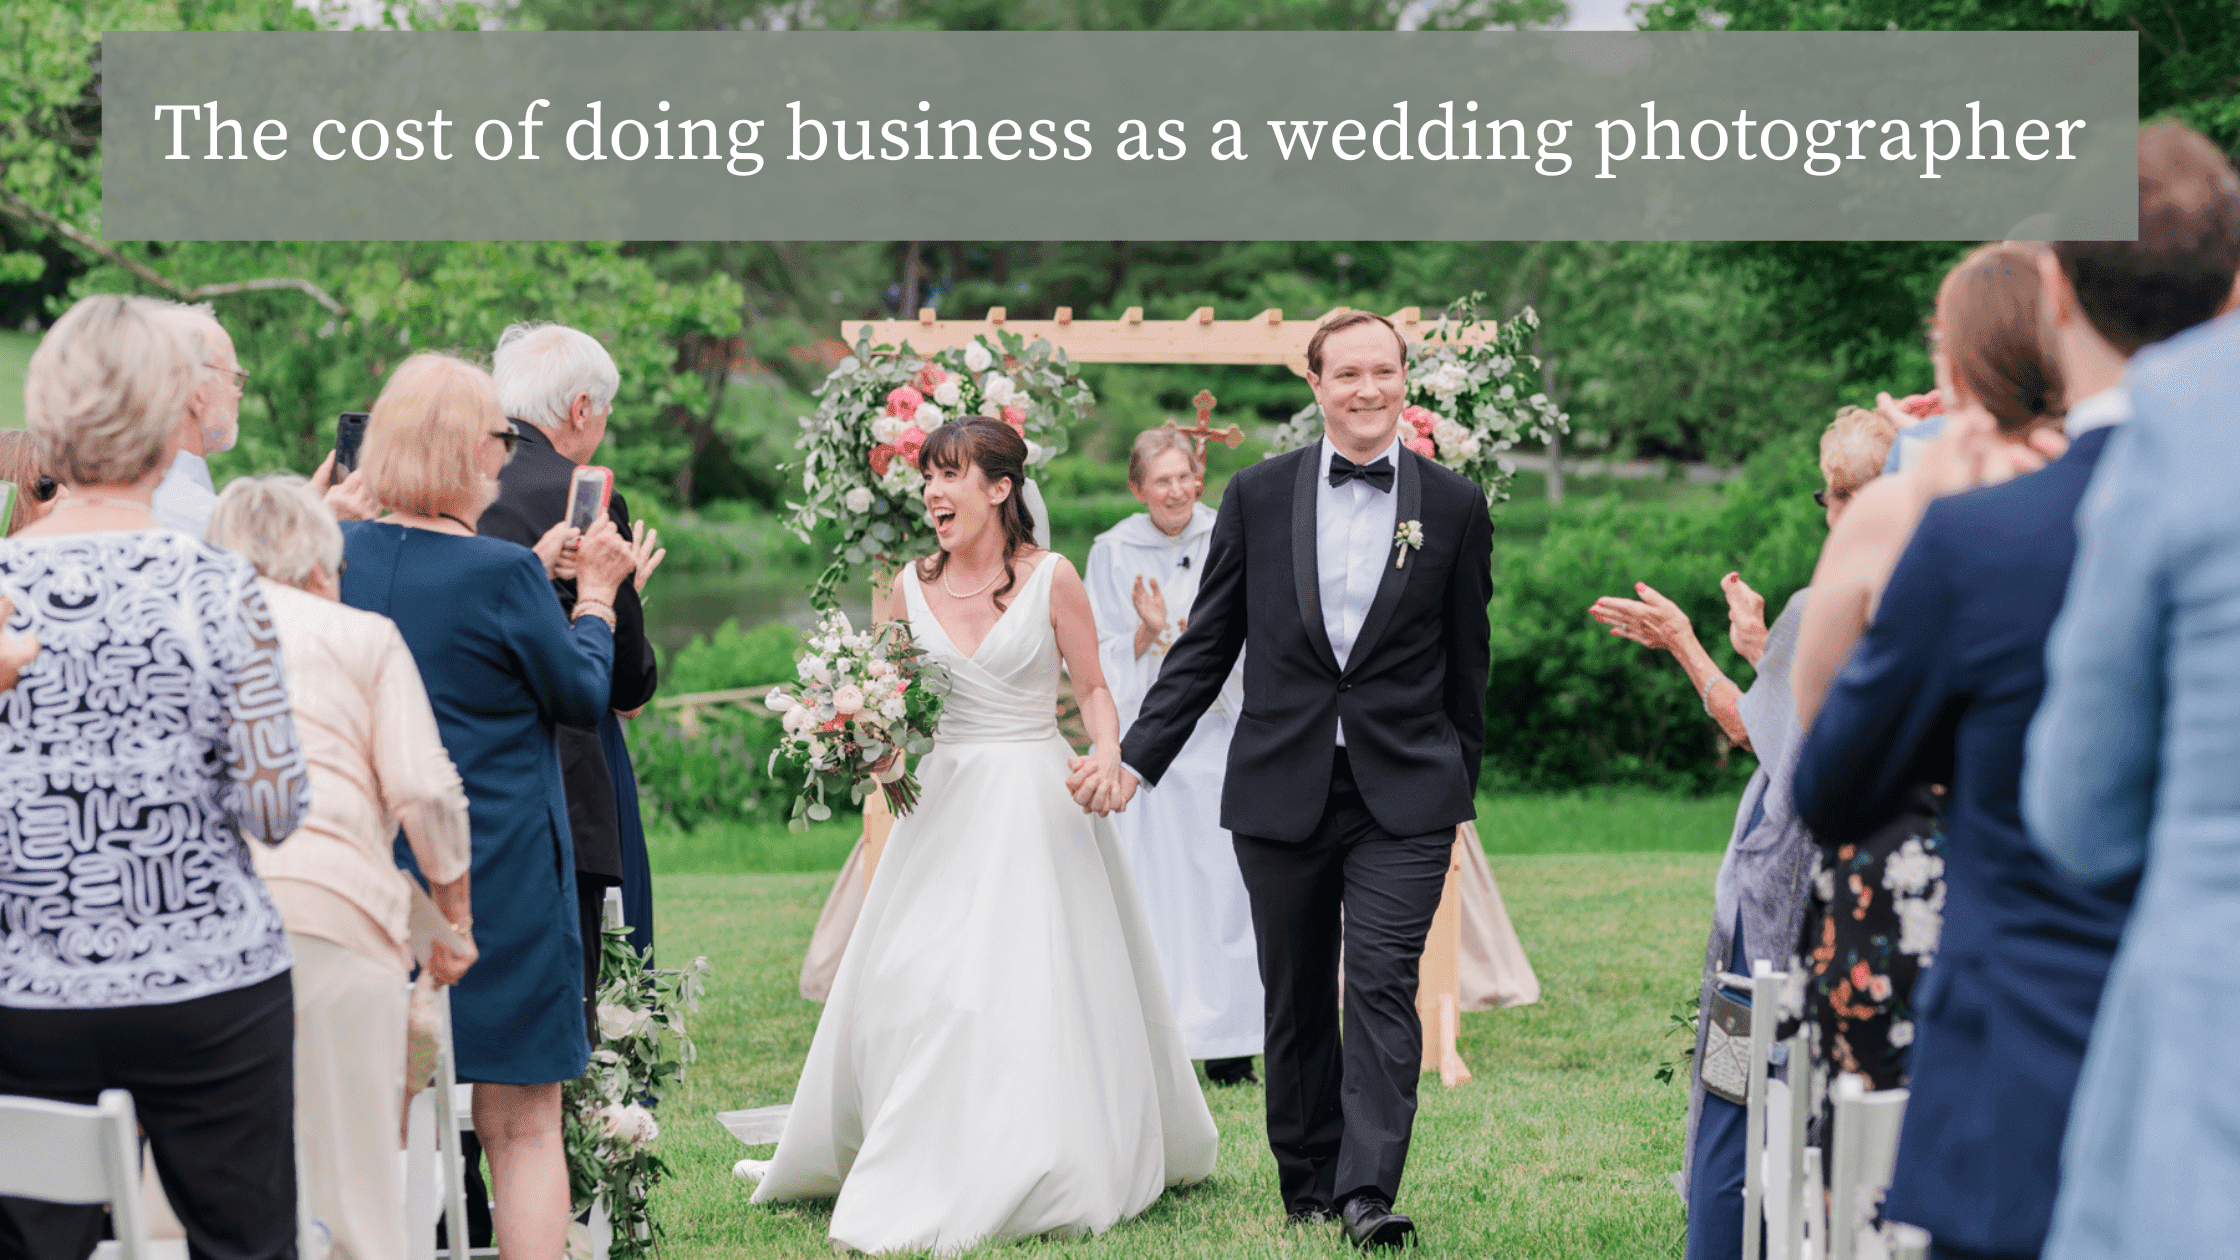 A bride and groom smile and walk back down the aisle at their sunny outdoor summer wedding after being pronounced husband and wife. Text at the top of the image reads: "The cost of doing business as a wedding photographer."